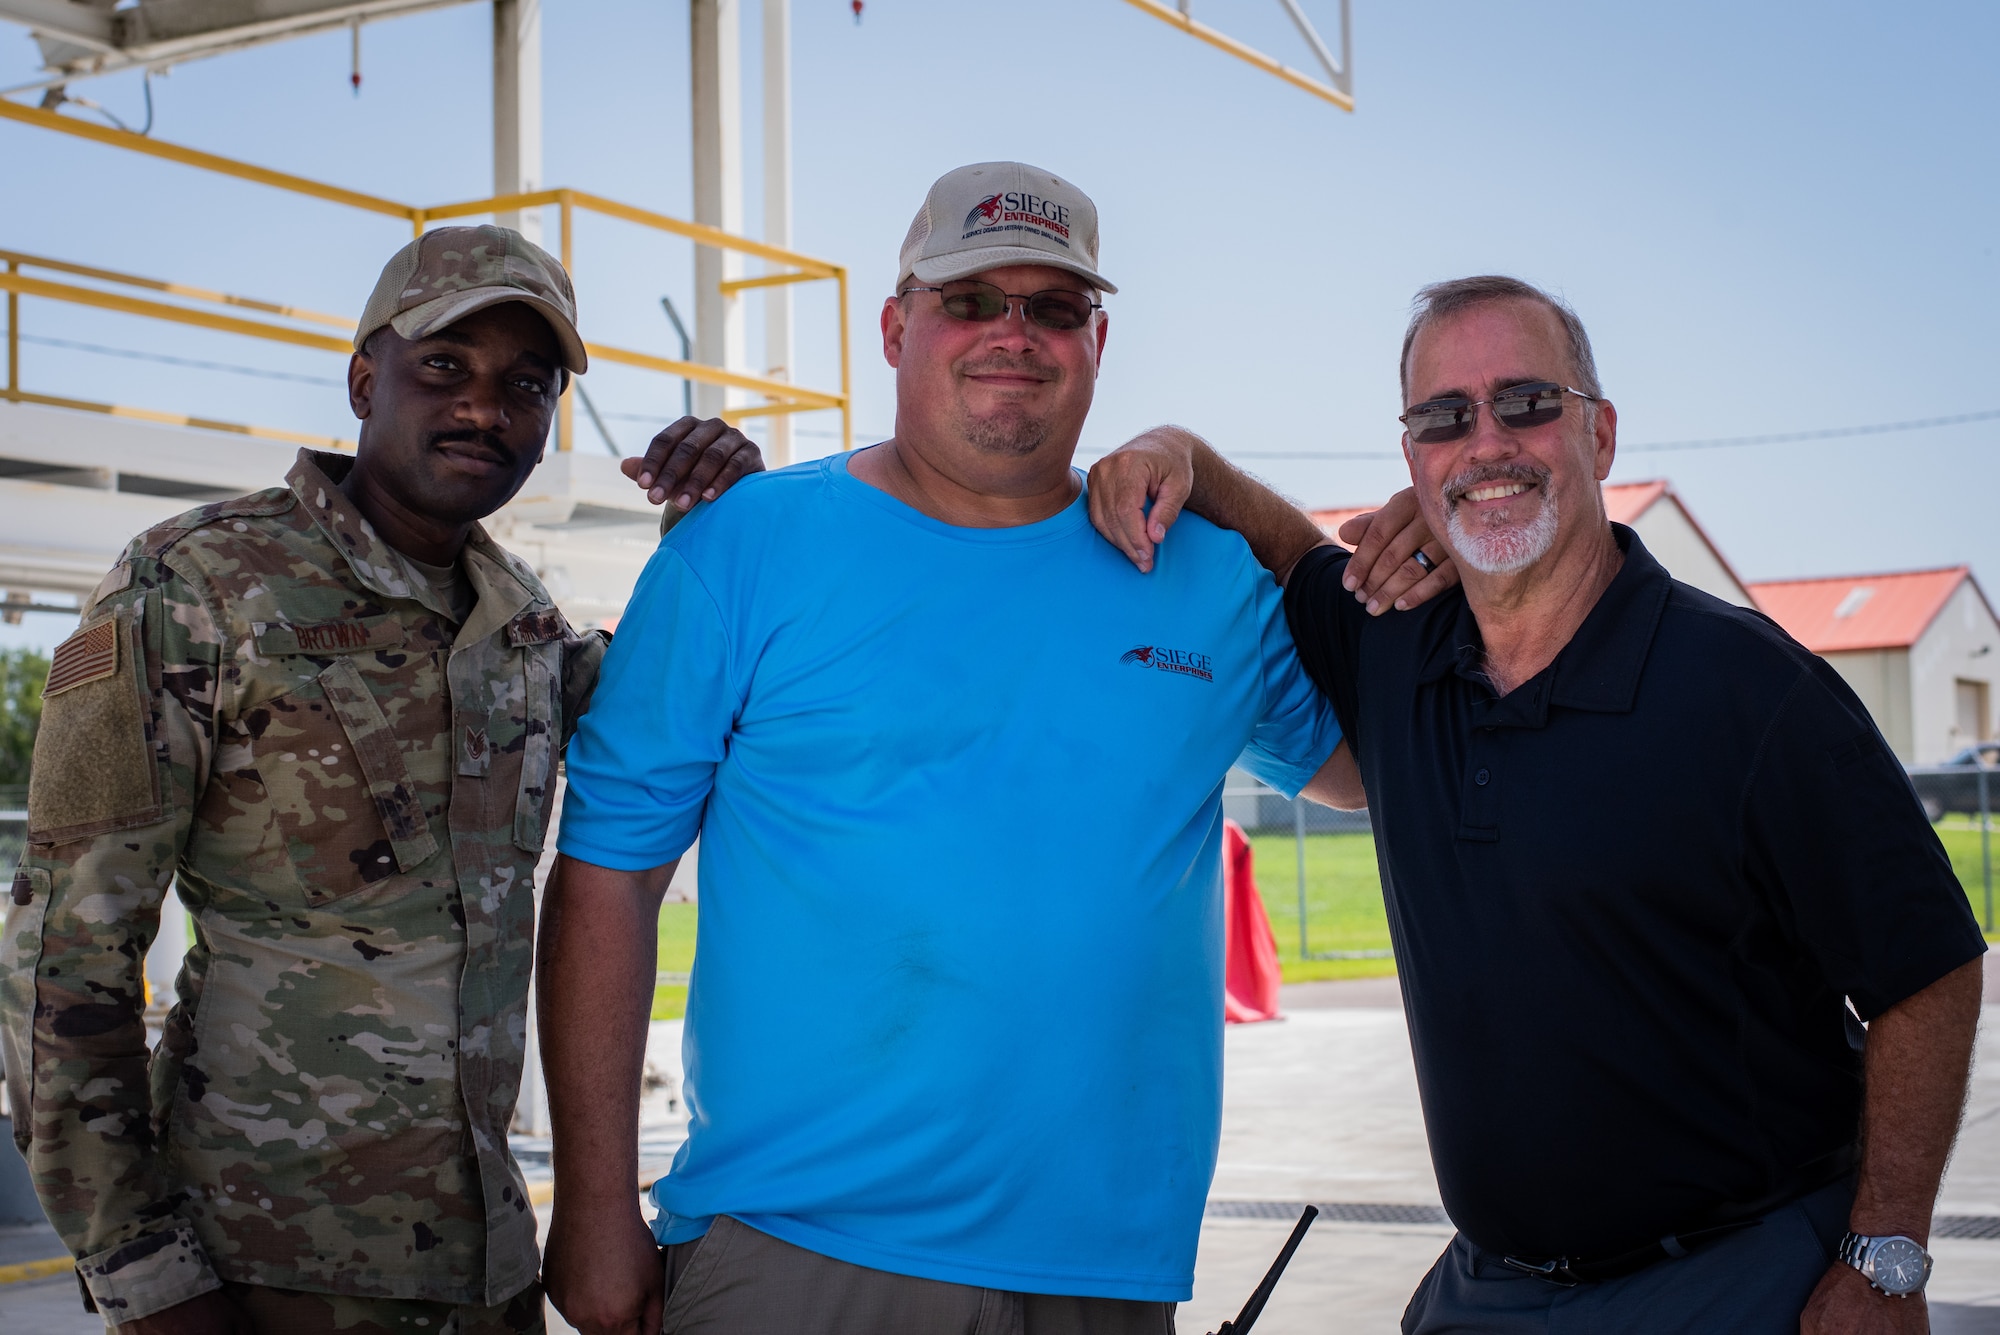 From left, U.S. Air Force Tech. Sgt. Spencer Brown, Defense Logistics Agency (DLA) Quality Assurance Representative, Brian Sutton, SIEGE Enterprises fuel distribution system operator, and Ronnie Brock, DLA Energy Quality Assurance and Contracting officer’s Representative, pose for a photo at MacDill Air Force Base, Florida, August 22, 2023.